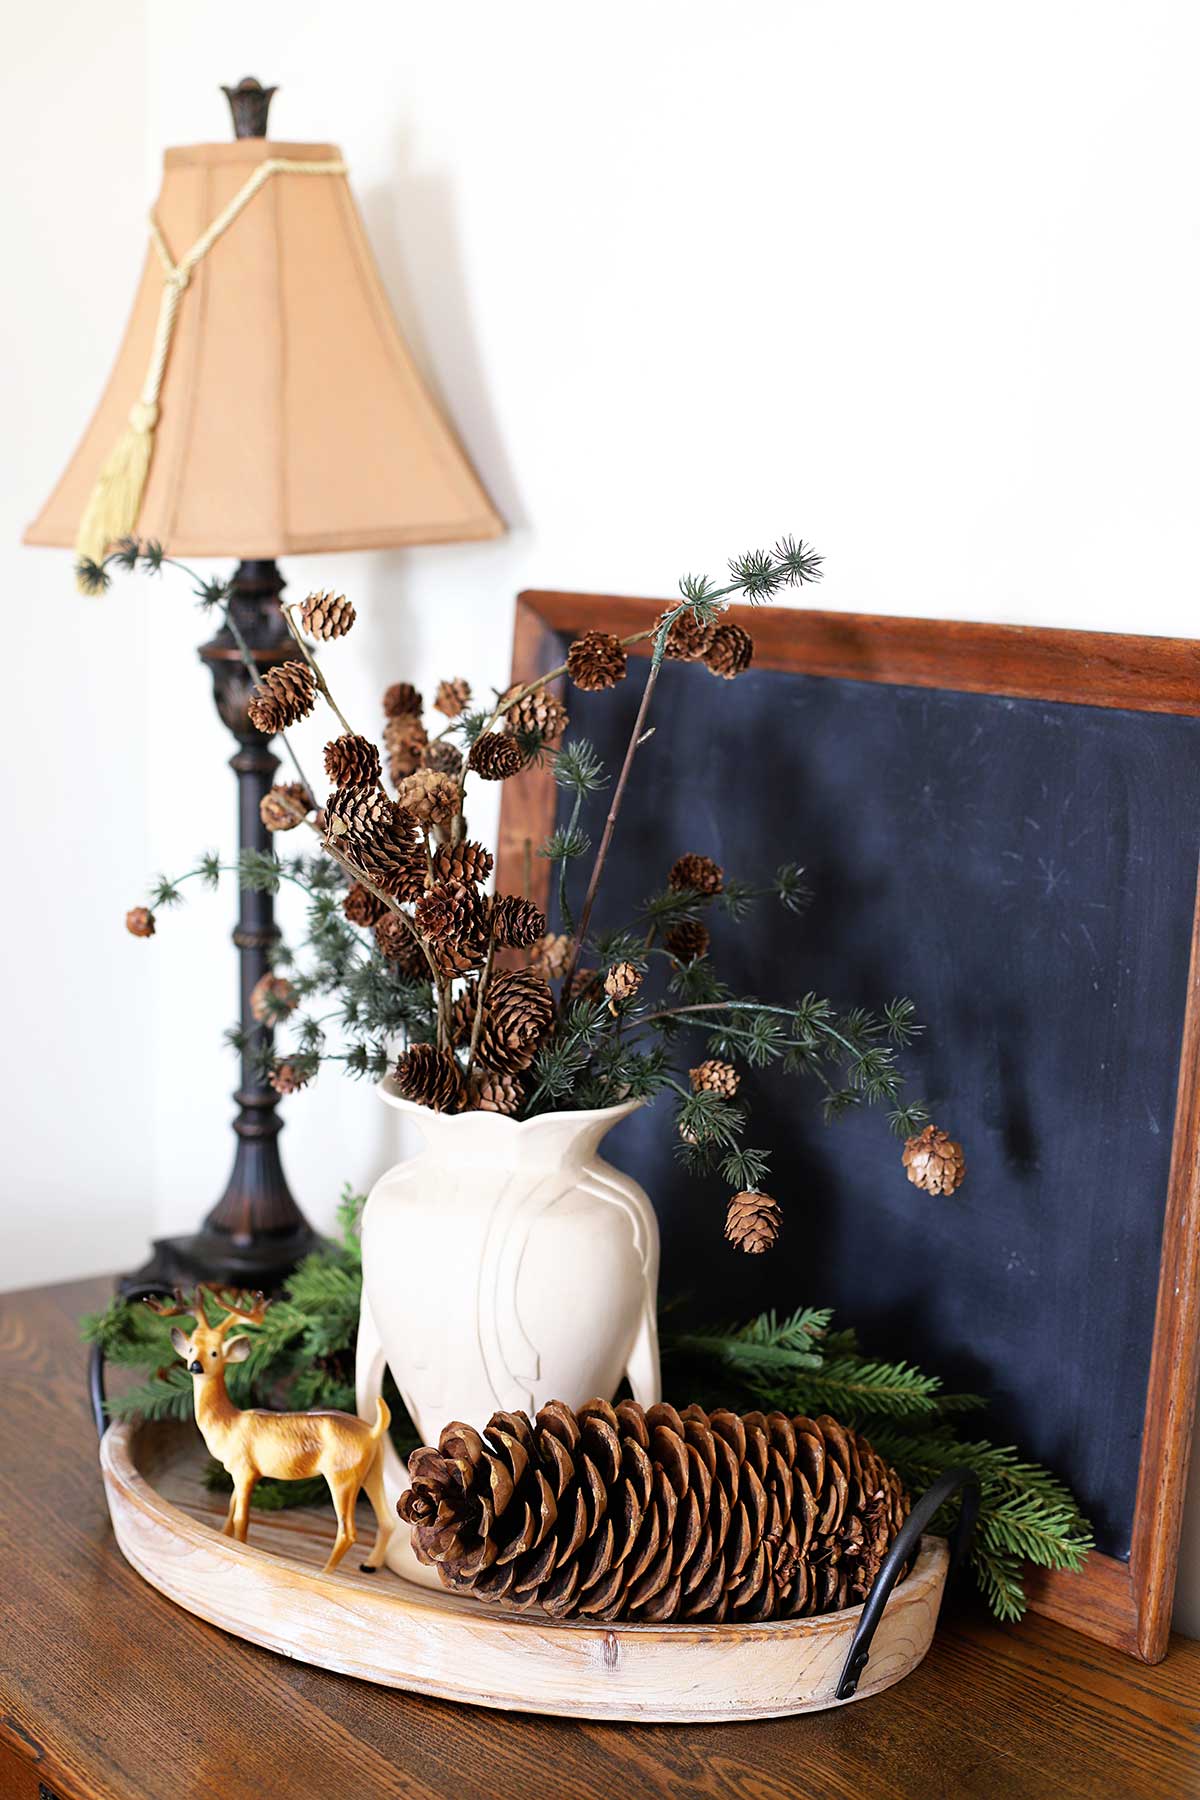 Pinecones For Winter Home Decor - House of Hawthornes